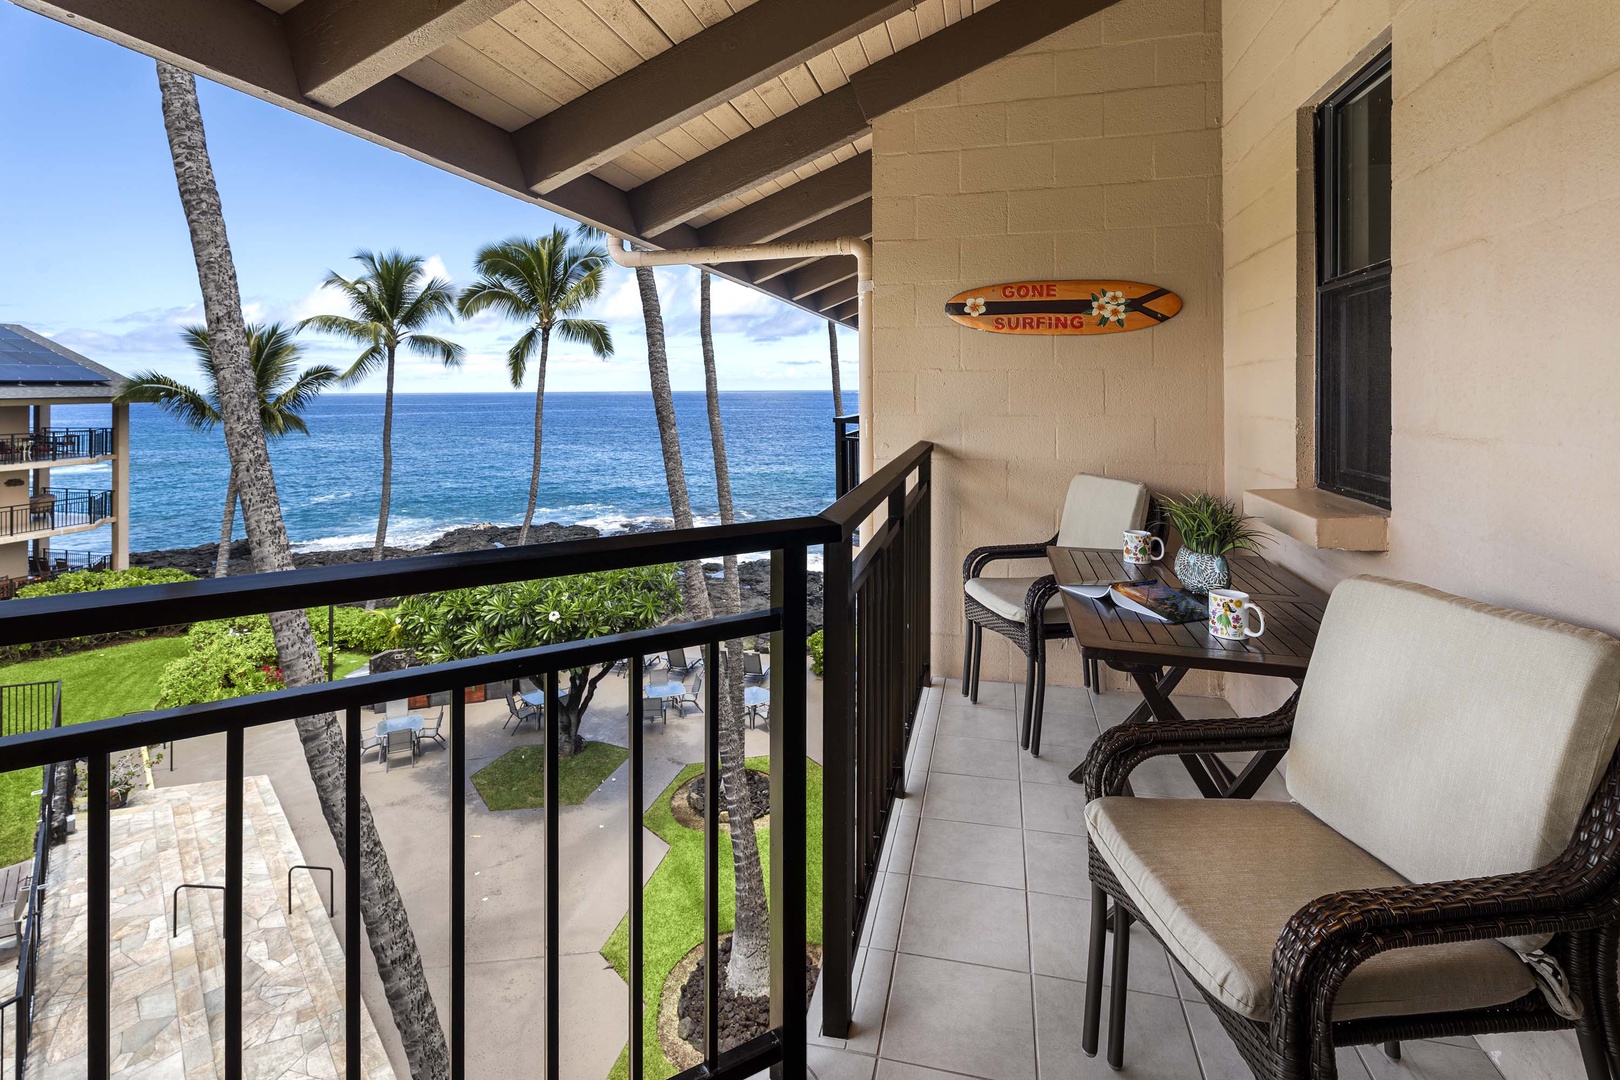 Kailua Kona Vacation Rentals, Kona Makai 6303 - Relax and unwind with captivating ocean views extend as far as the eye can see, painting a serene island picture.